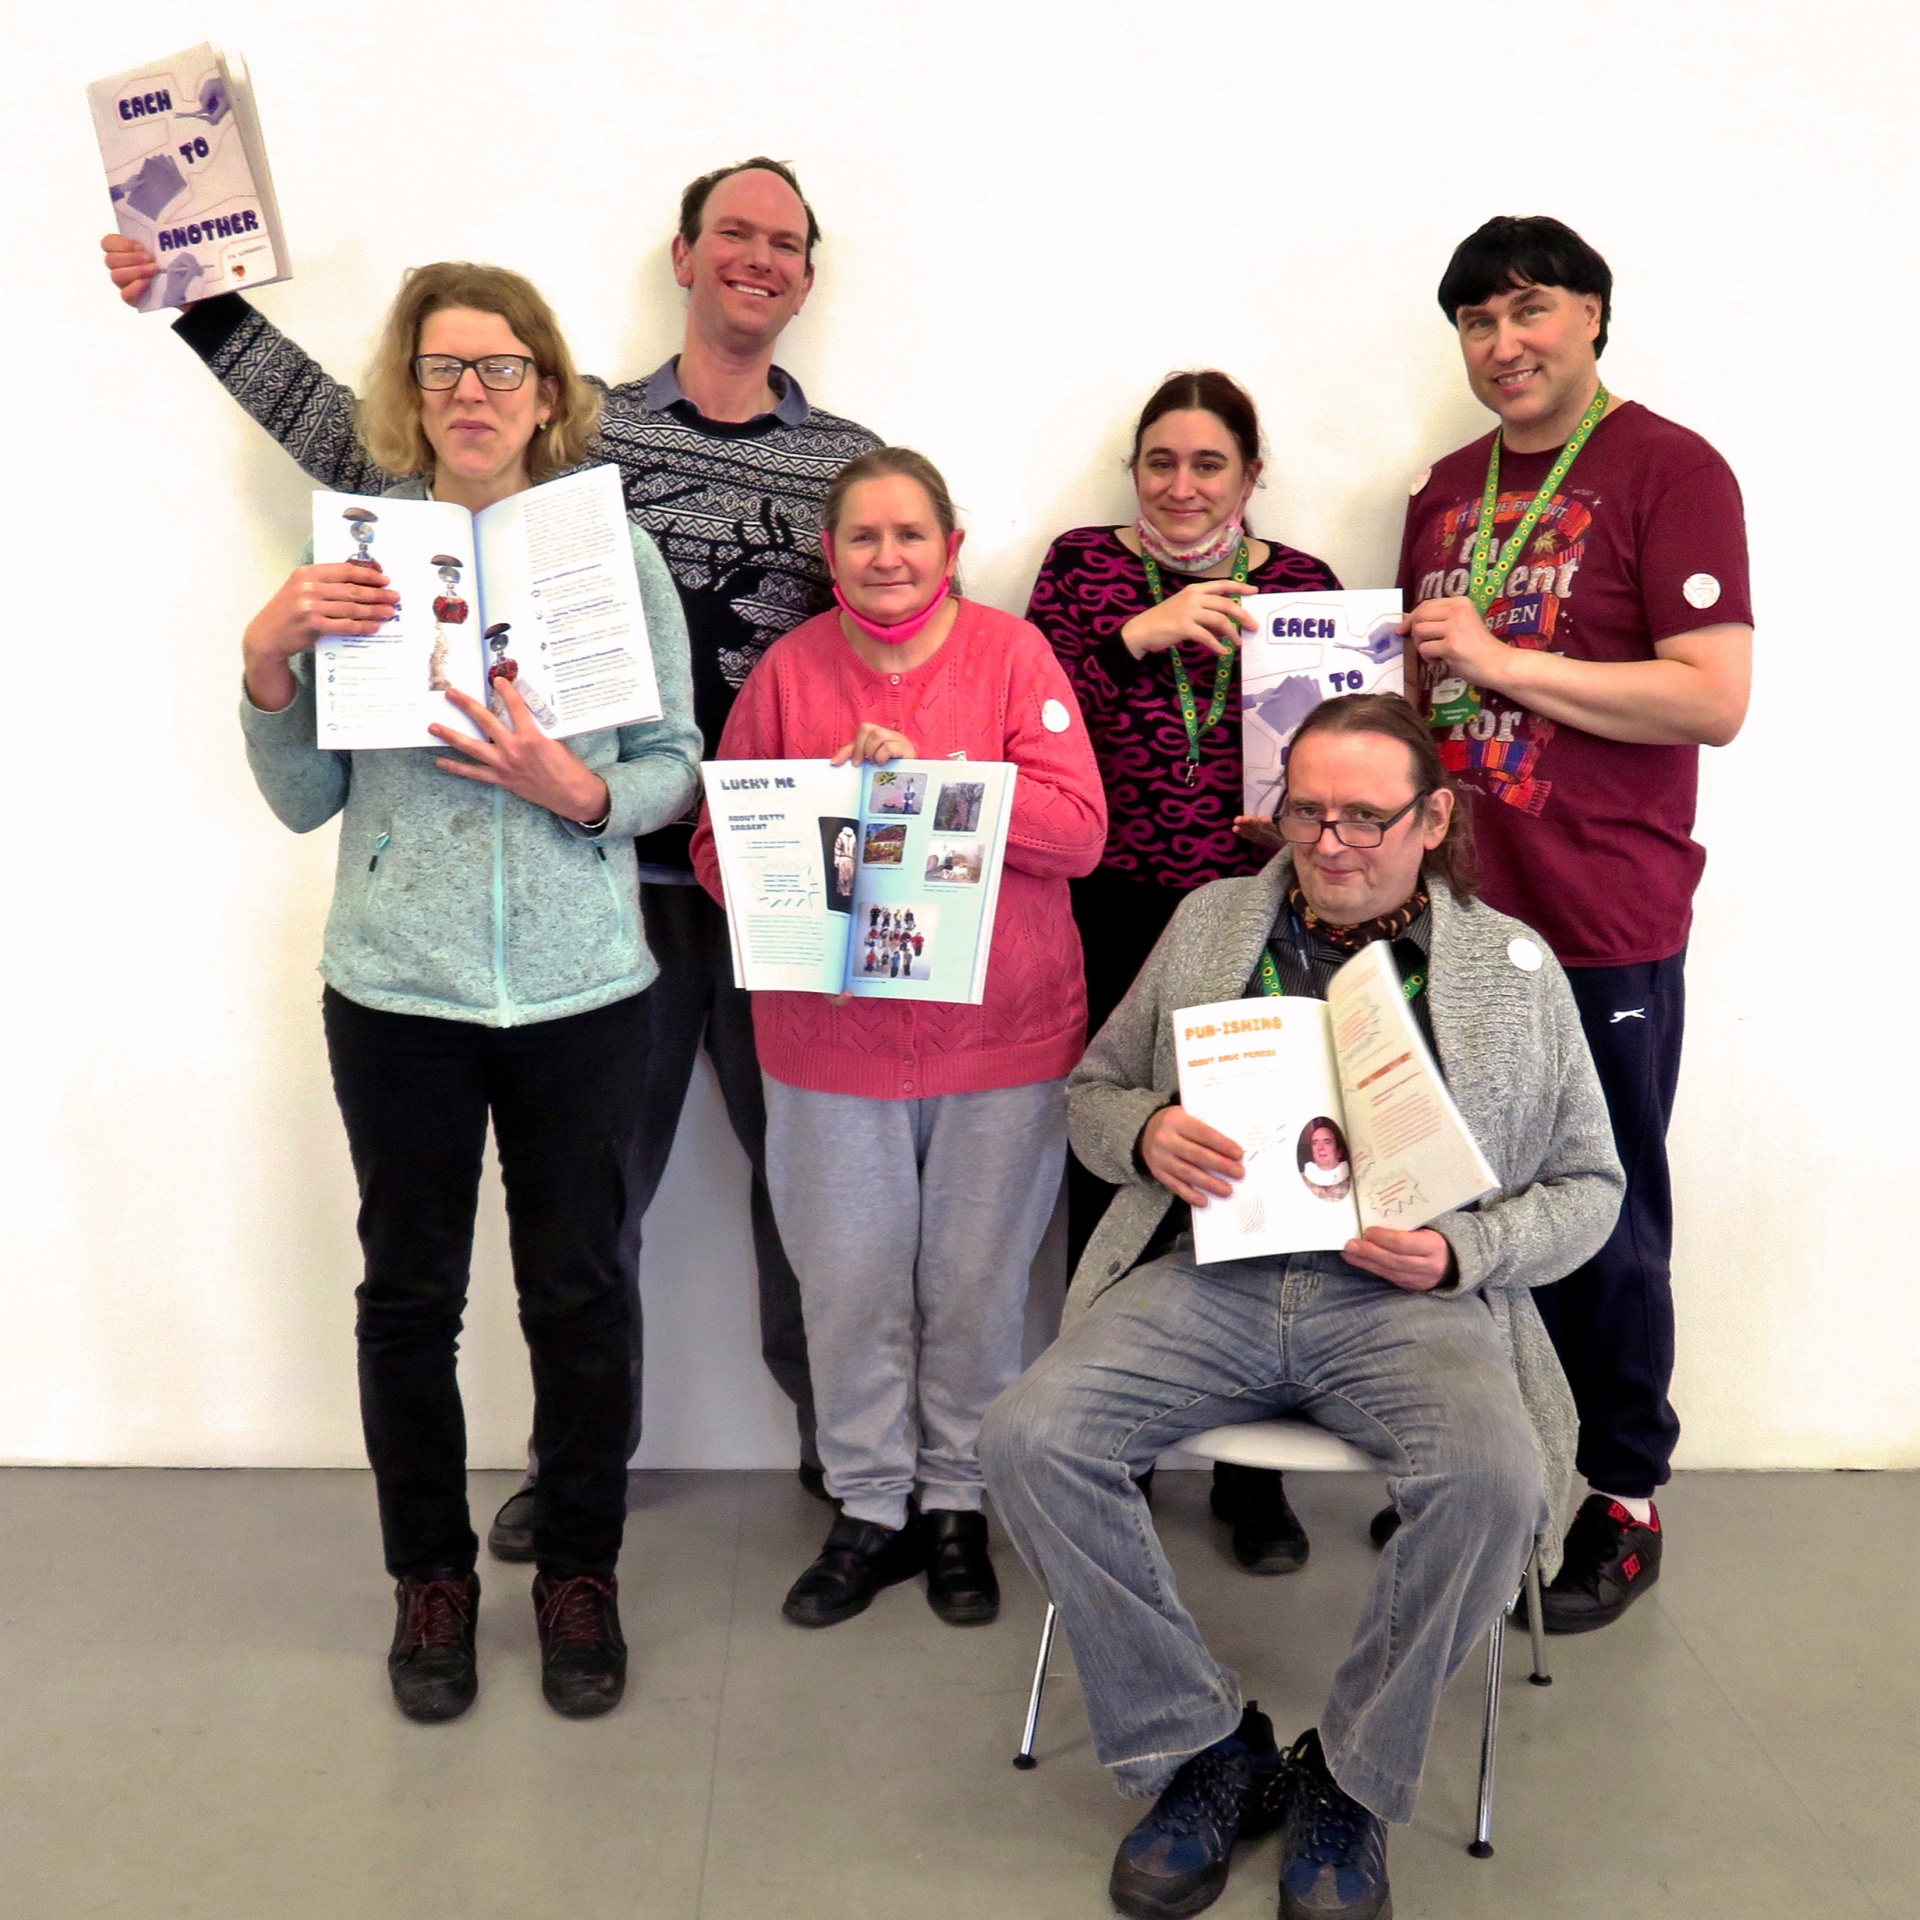 Six AIM artists stand together and hold up copies of their new publication. There are three women and three men. The man in the foreground is seated.